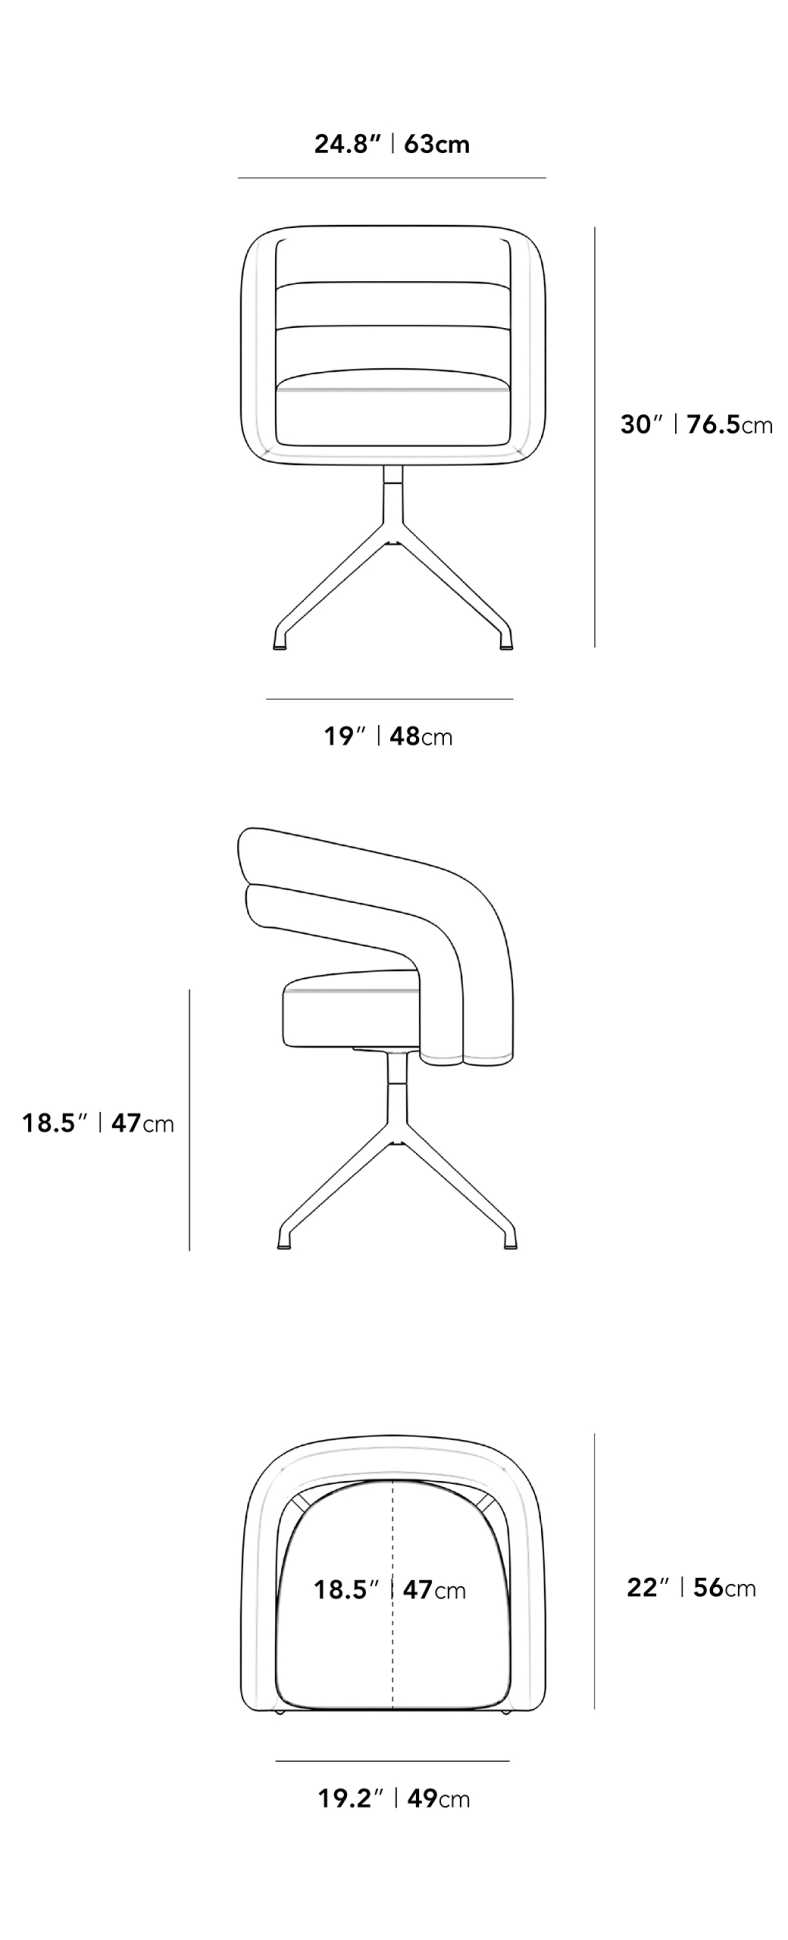 Dimensions for Mia Dining Chair